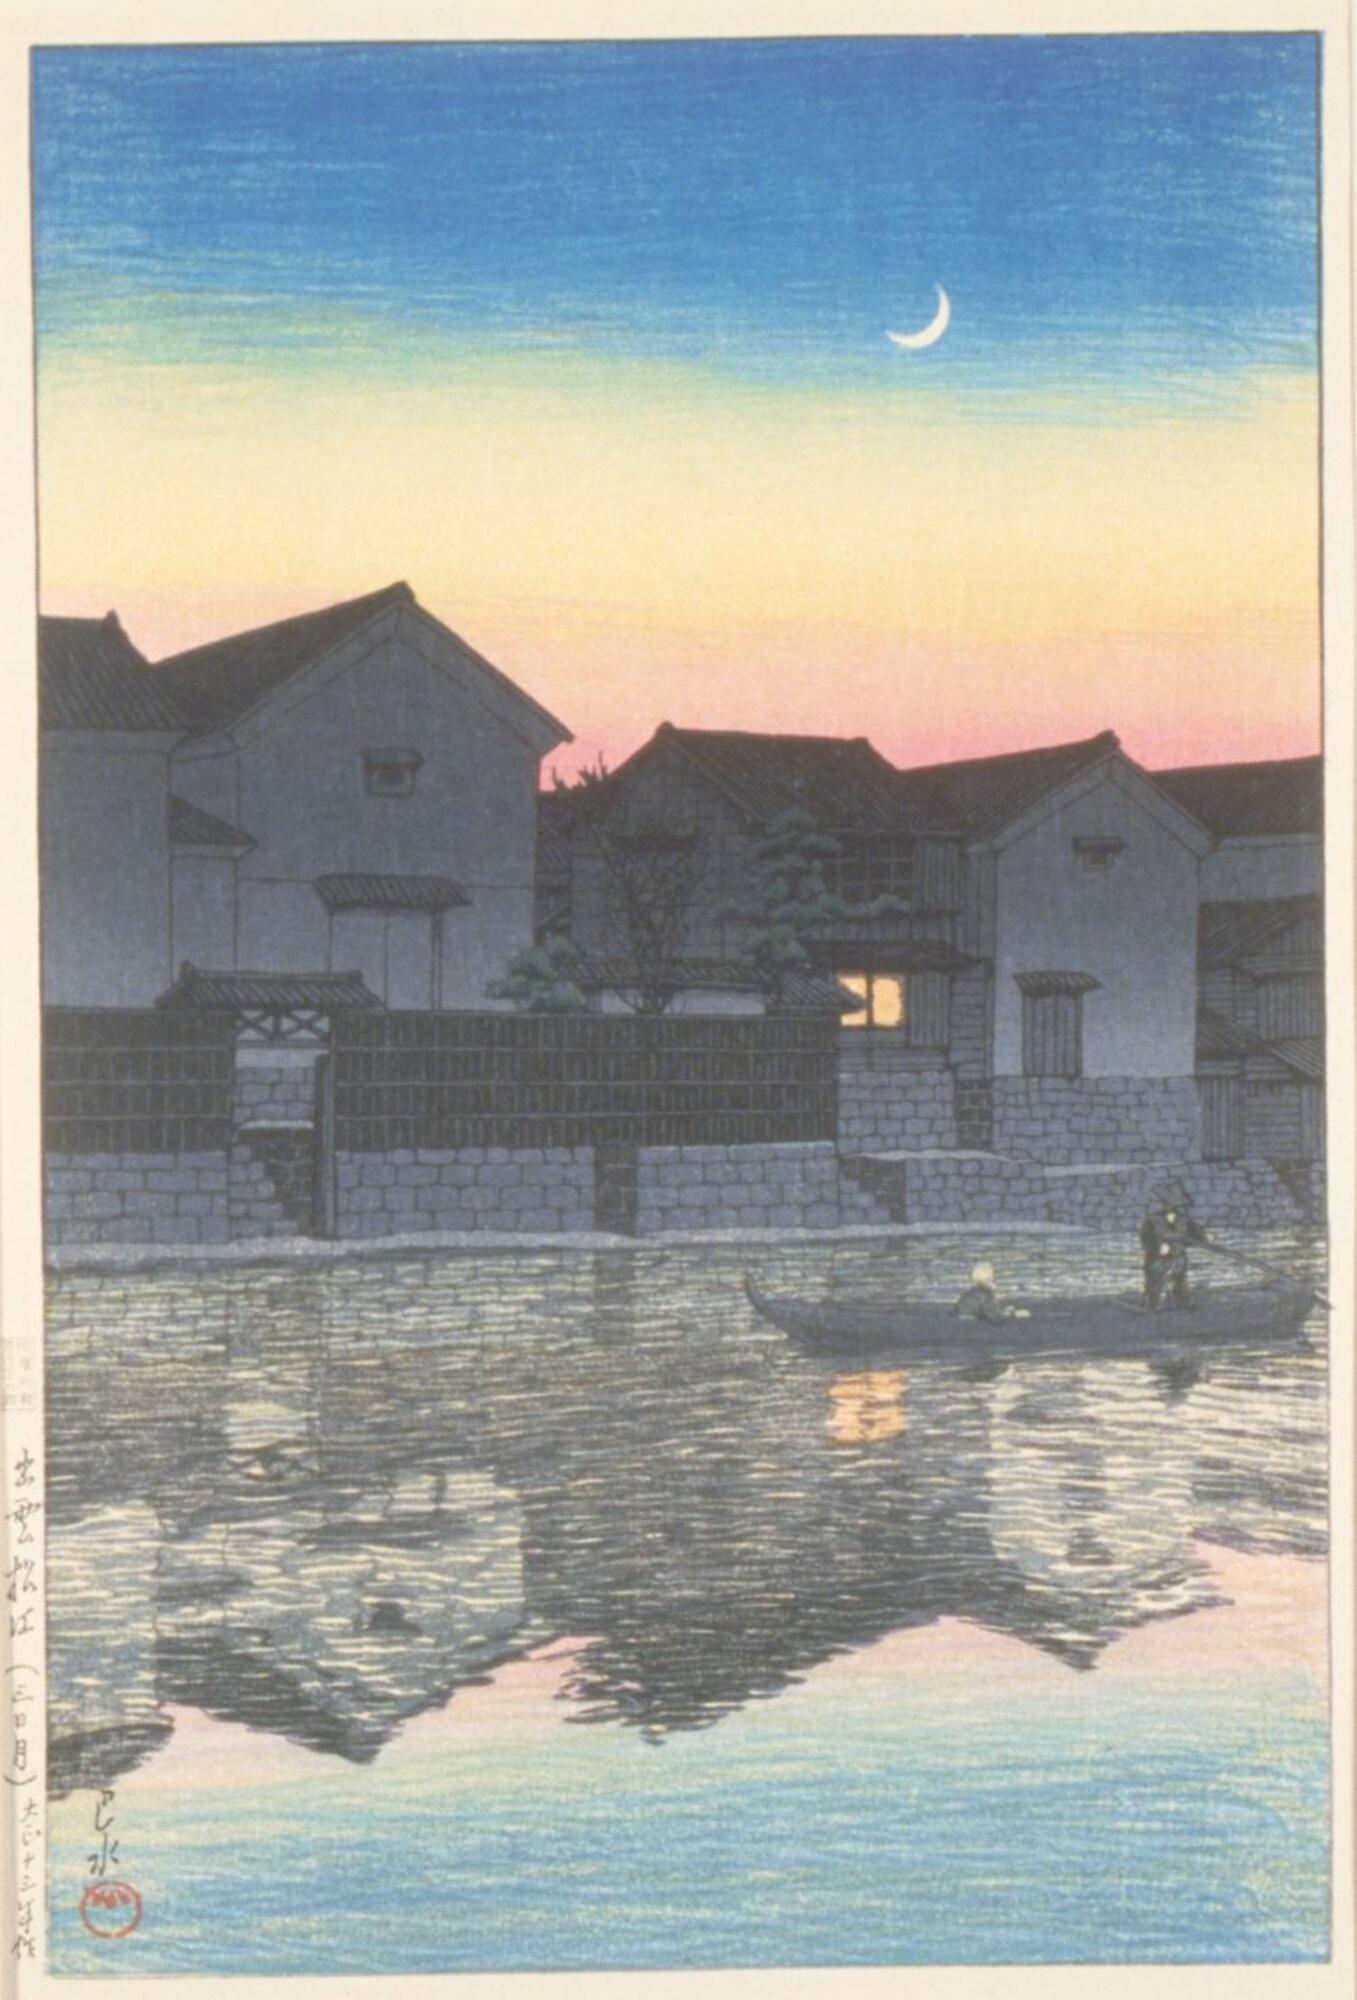 A man ferries a passenger along a river at sunset. The buildings and stone walls along the river are reflected along with the colorful sky above.